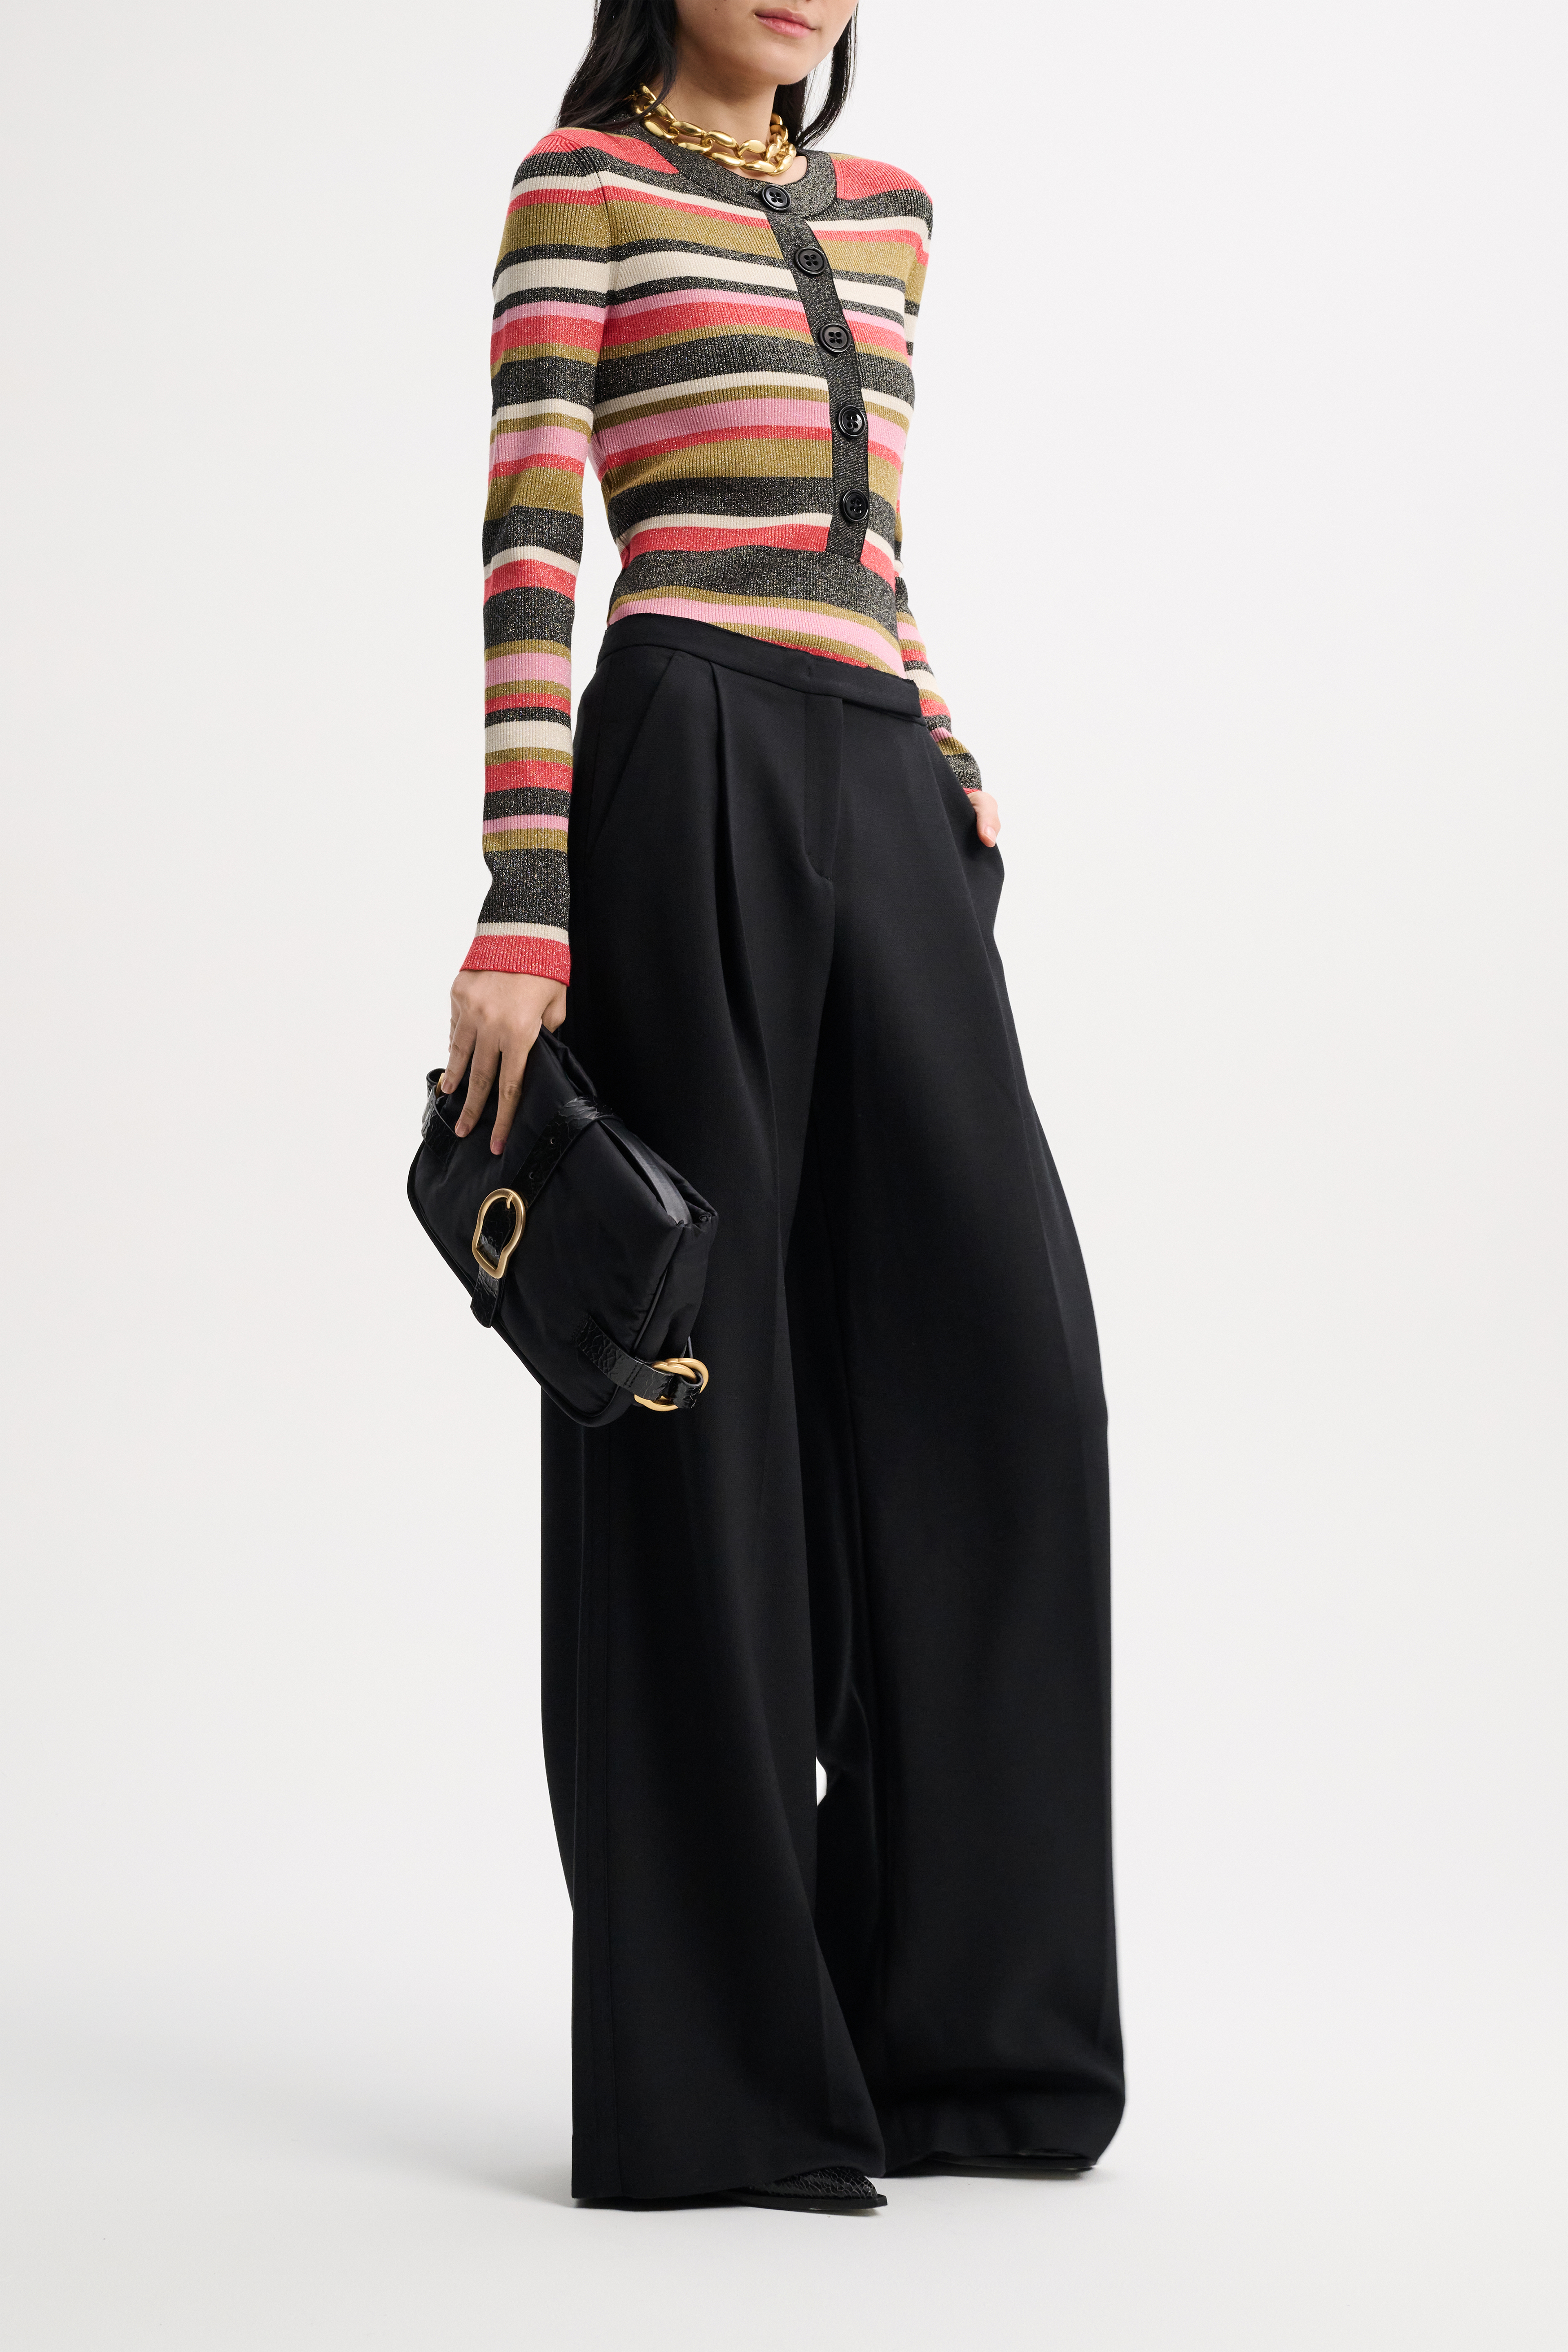 Dorothee Schumacher Striped knit henley with